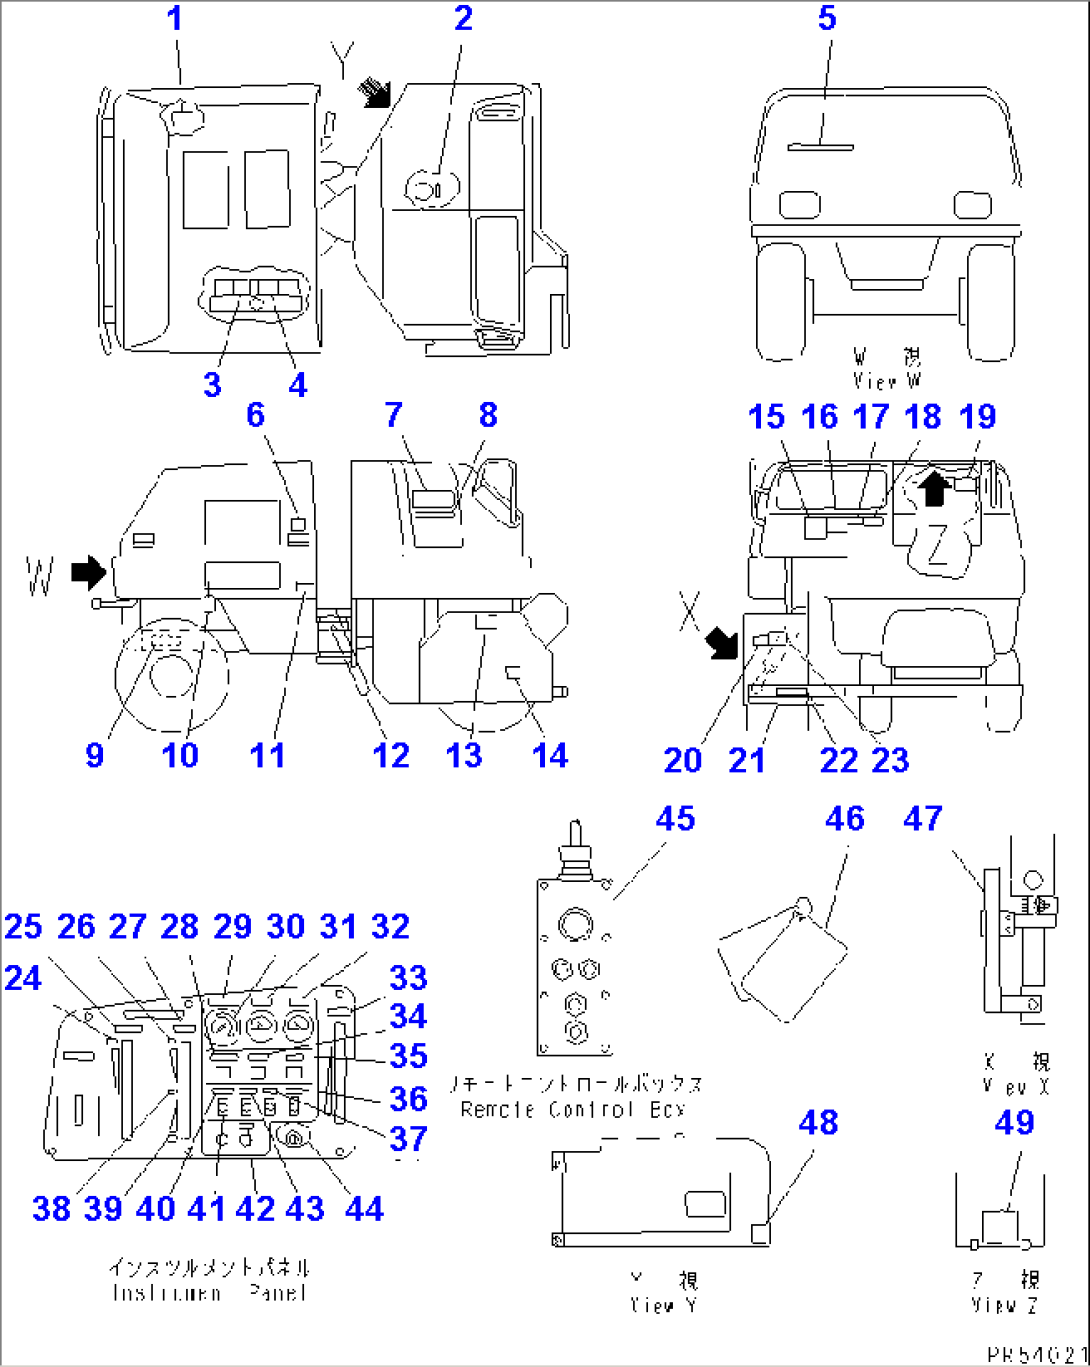 MARKS AND PLATES (GERMANY)(#1045-1050)